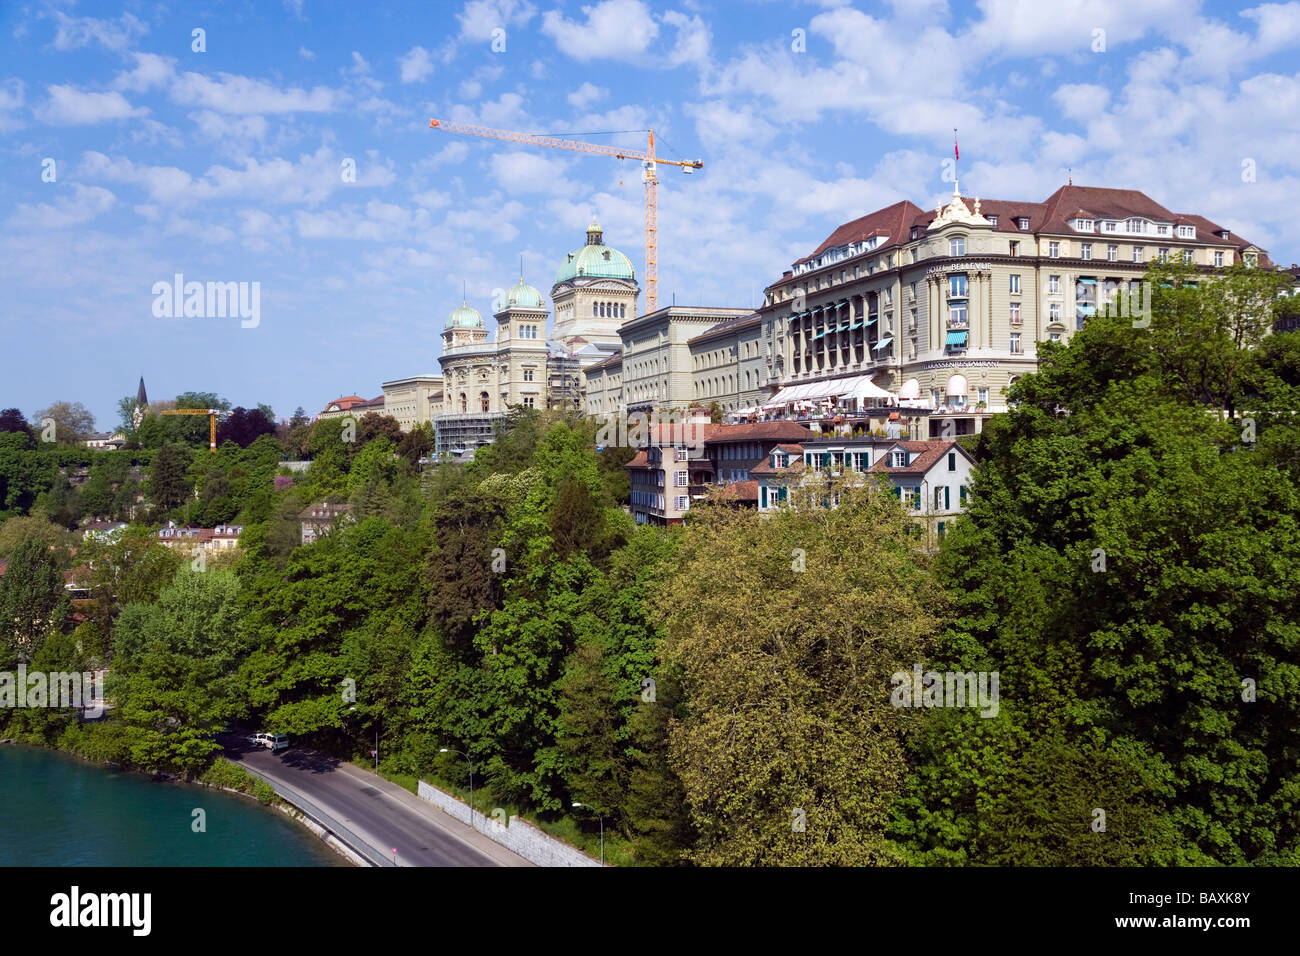 View of the House of Parliament, Bundeshaus, Bellevue, Old City of Berne, Berne, Switzerland Stock Photo